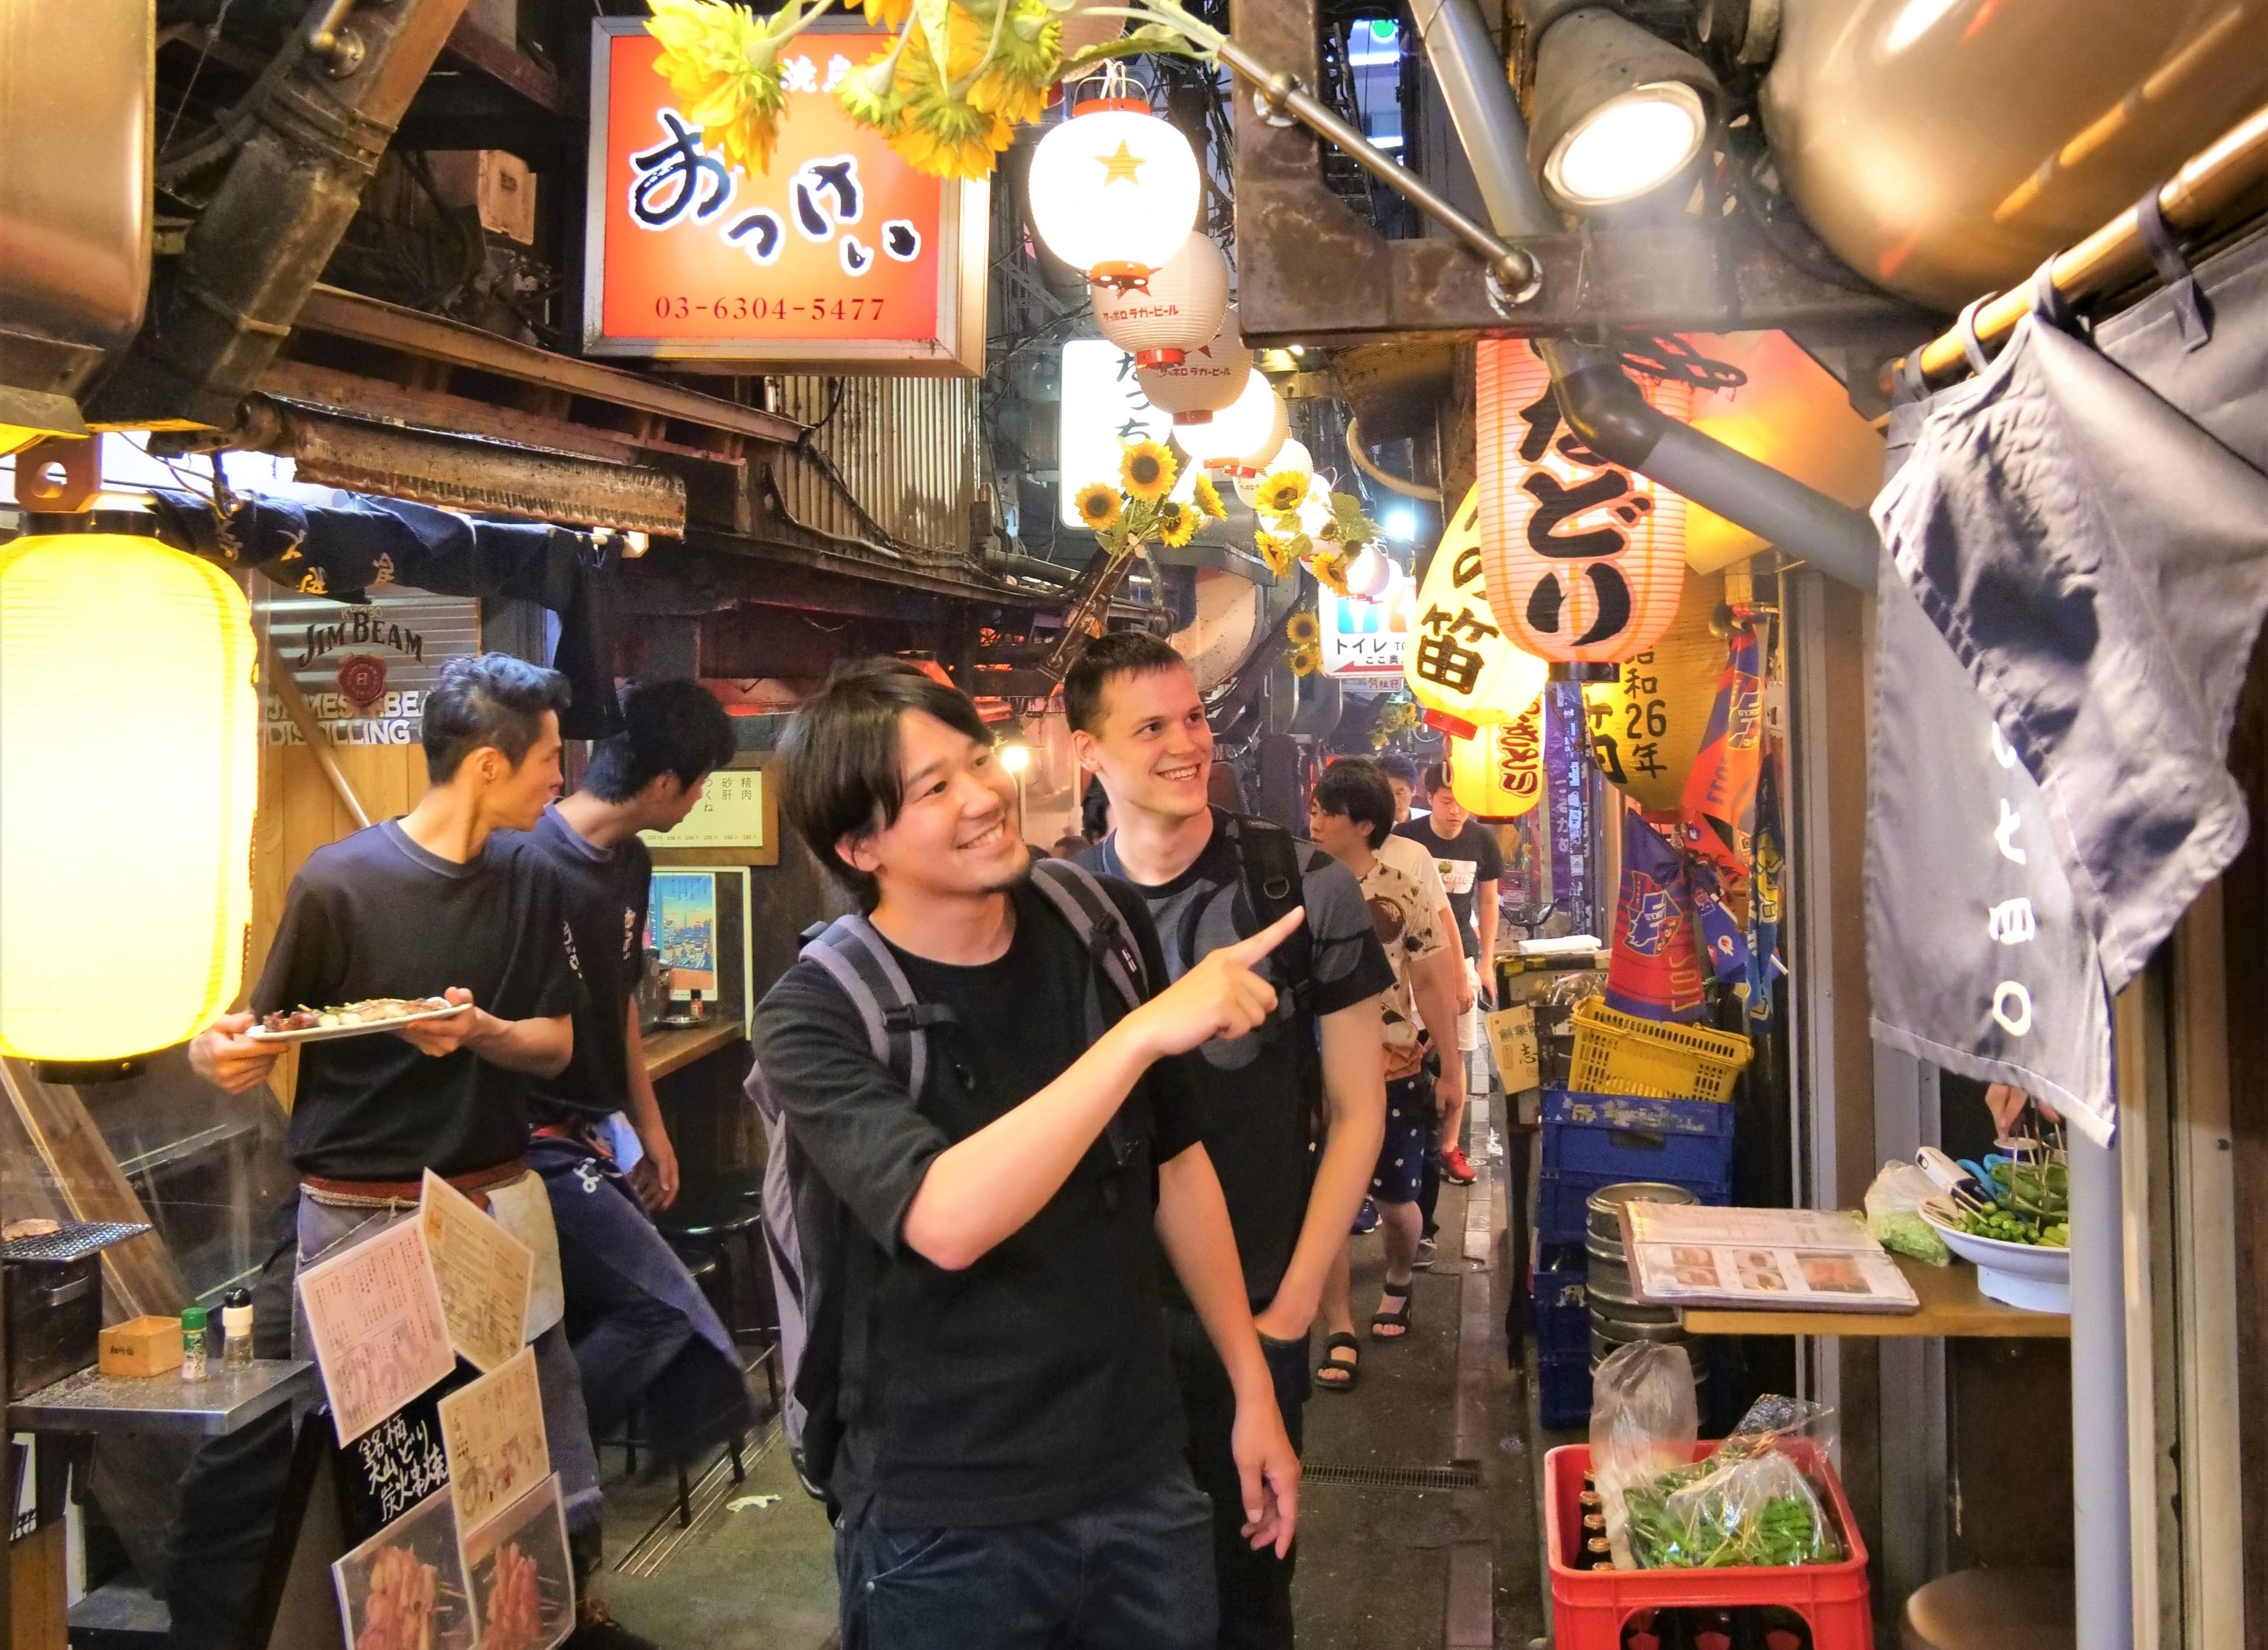 Venturing into the oldest food alley in Shinjuku